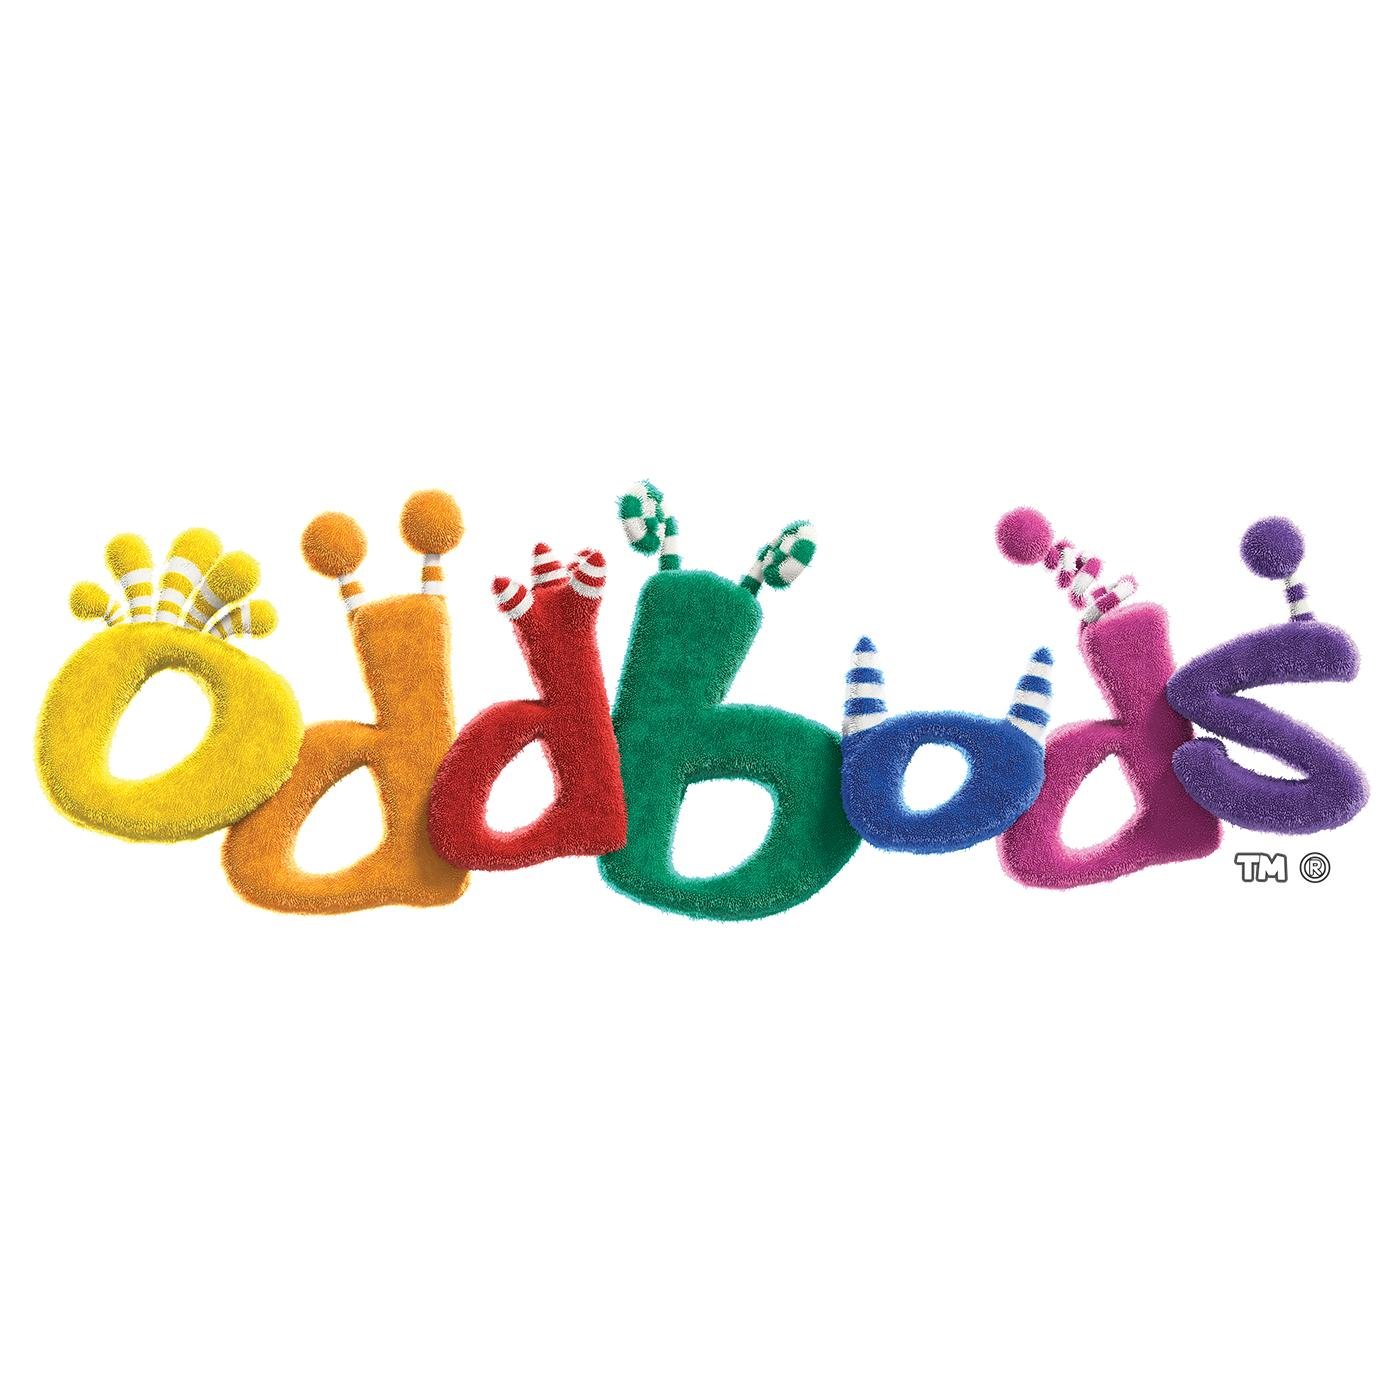 Oddbods is an award-winning, CGI-animated comedy television series produced by the Singapore-based studio One Animation.